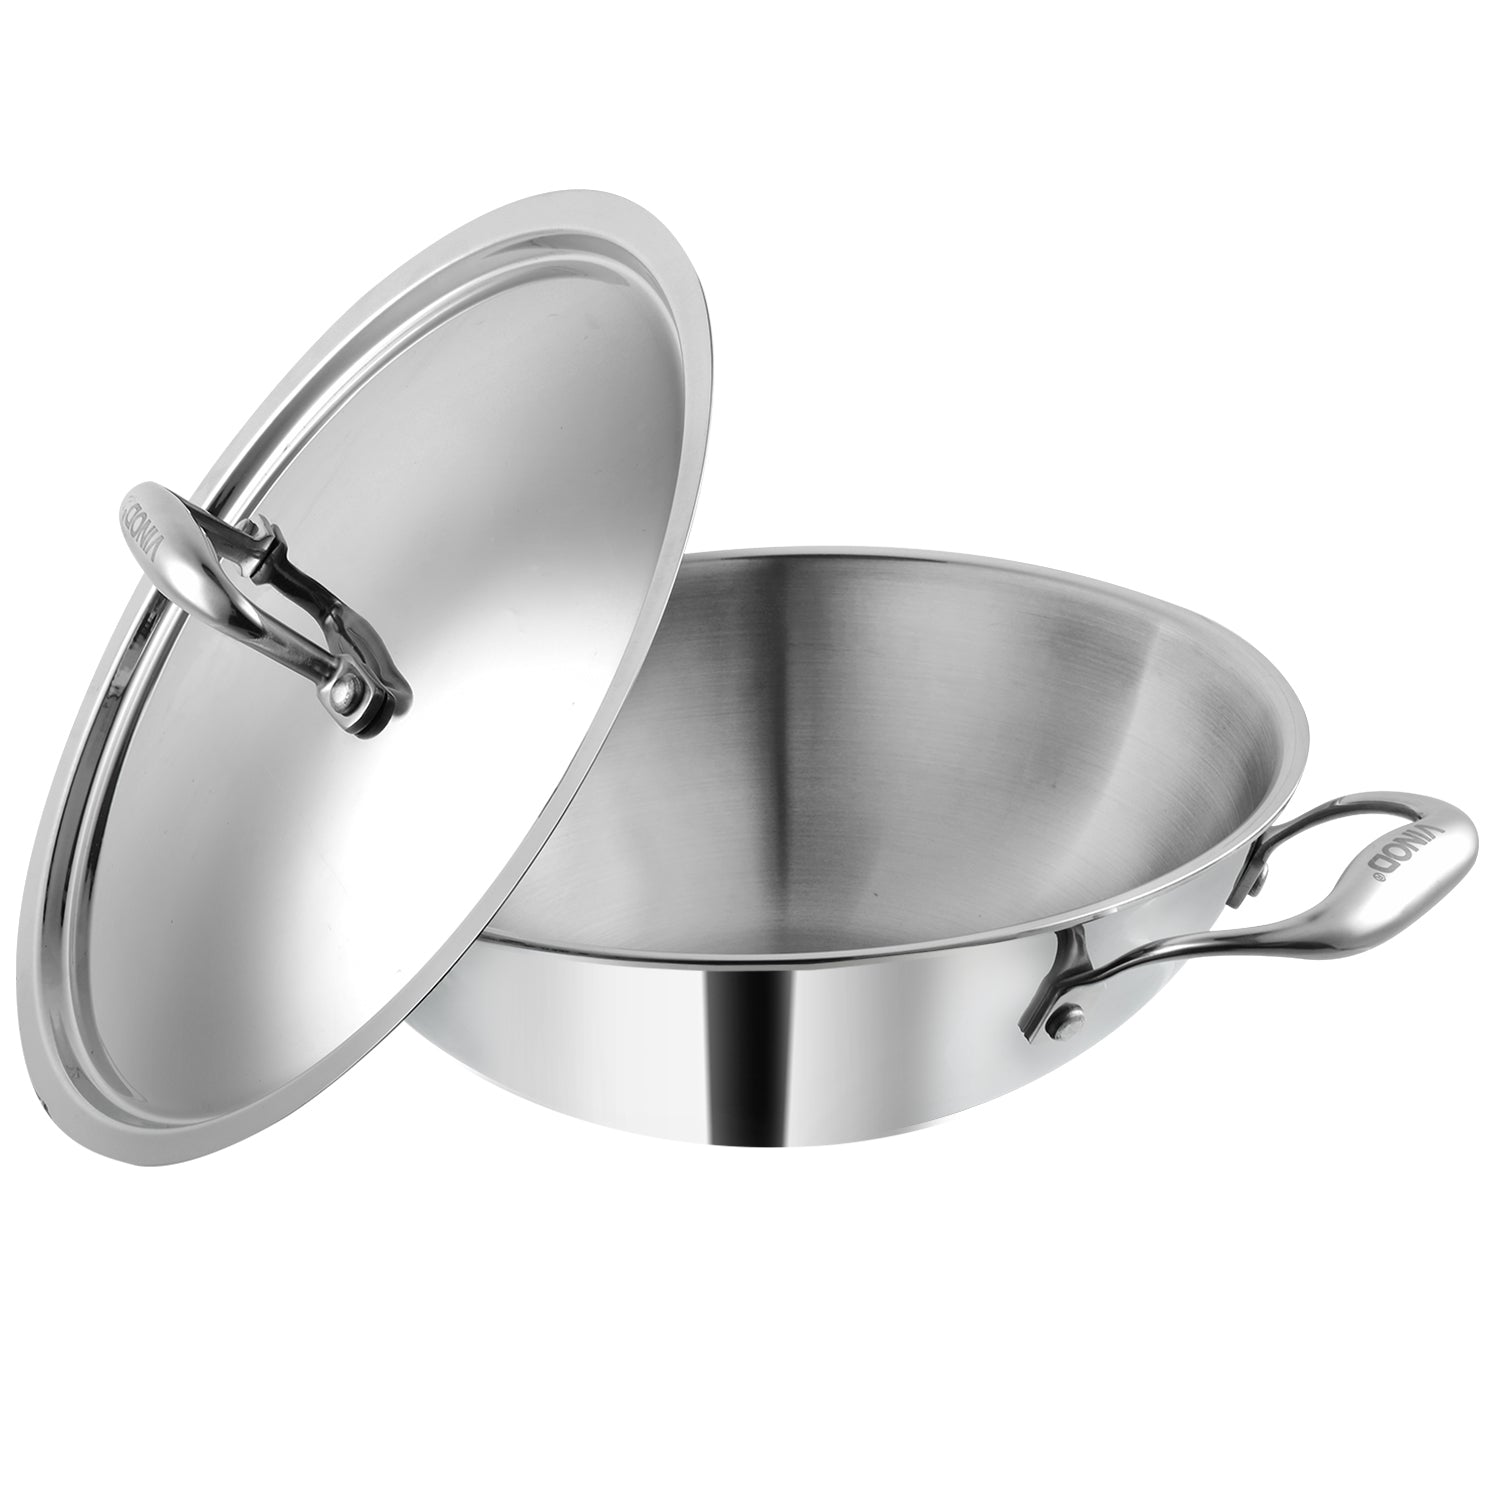 Triply Stainless Steel Kadai with Lid